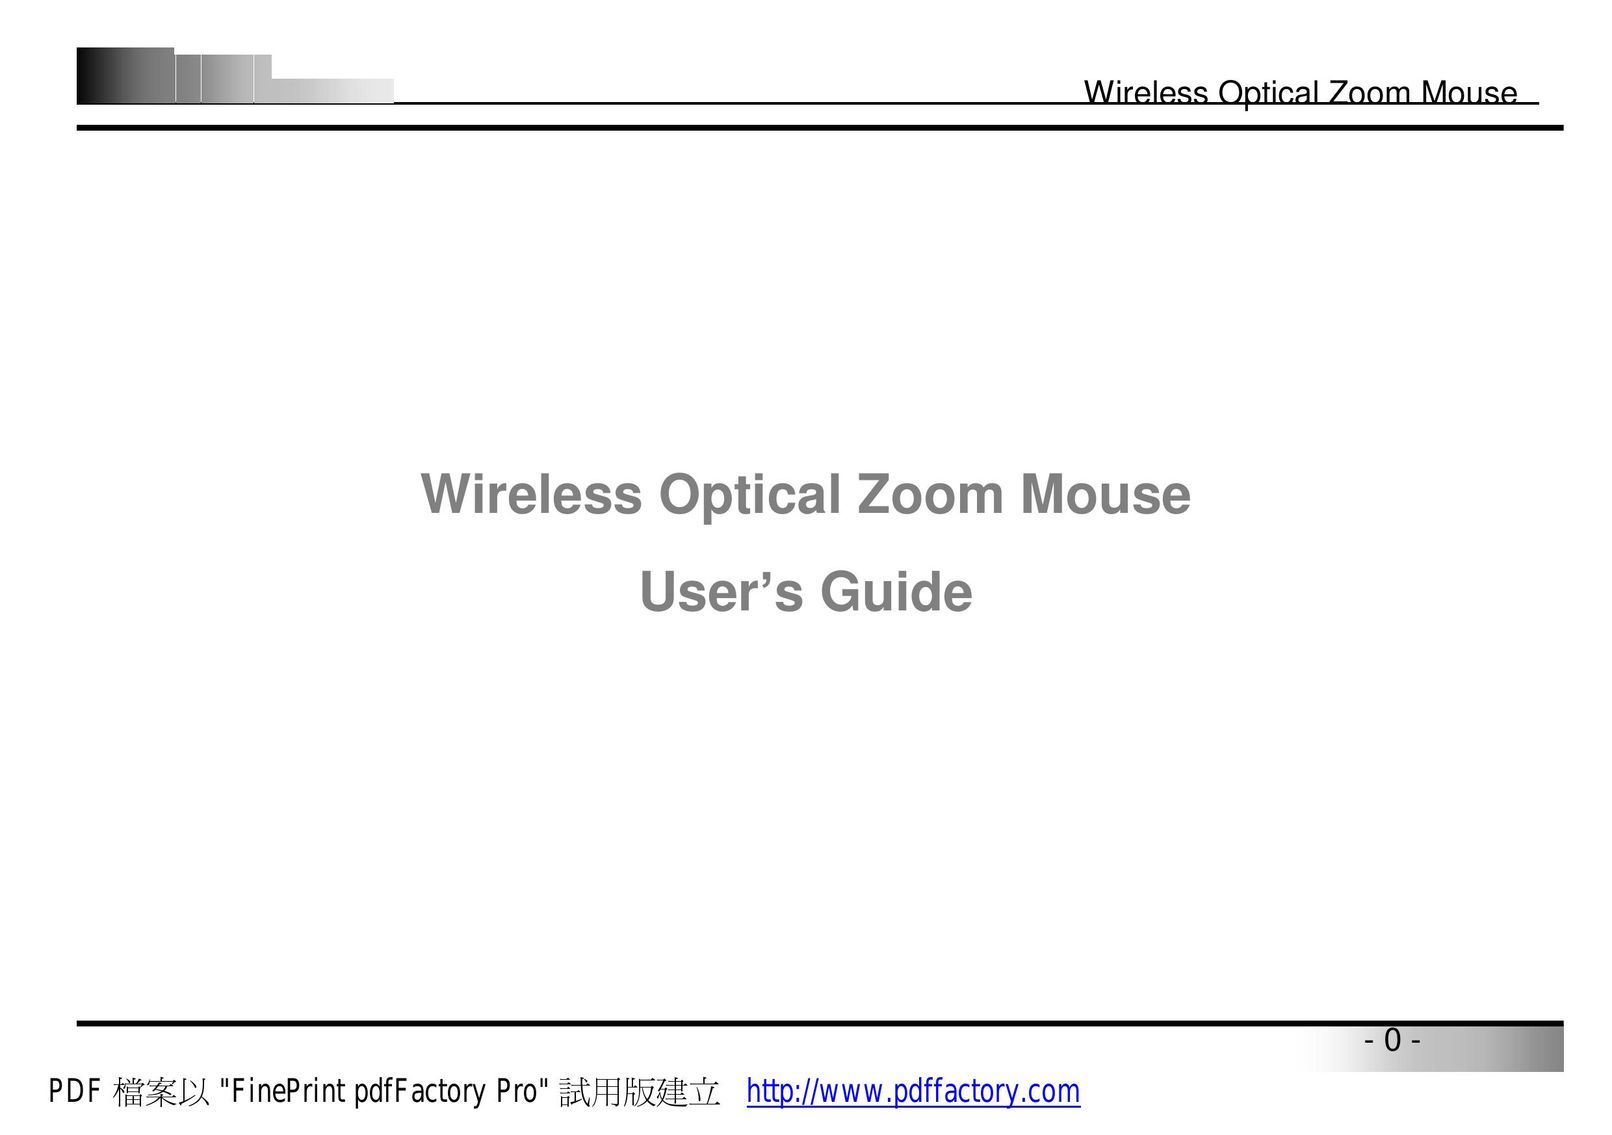 A4 Tech. Wireless Optical Zoom Mouse Mouse User Manual